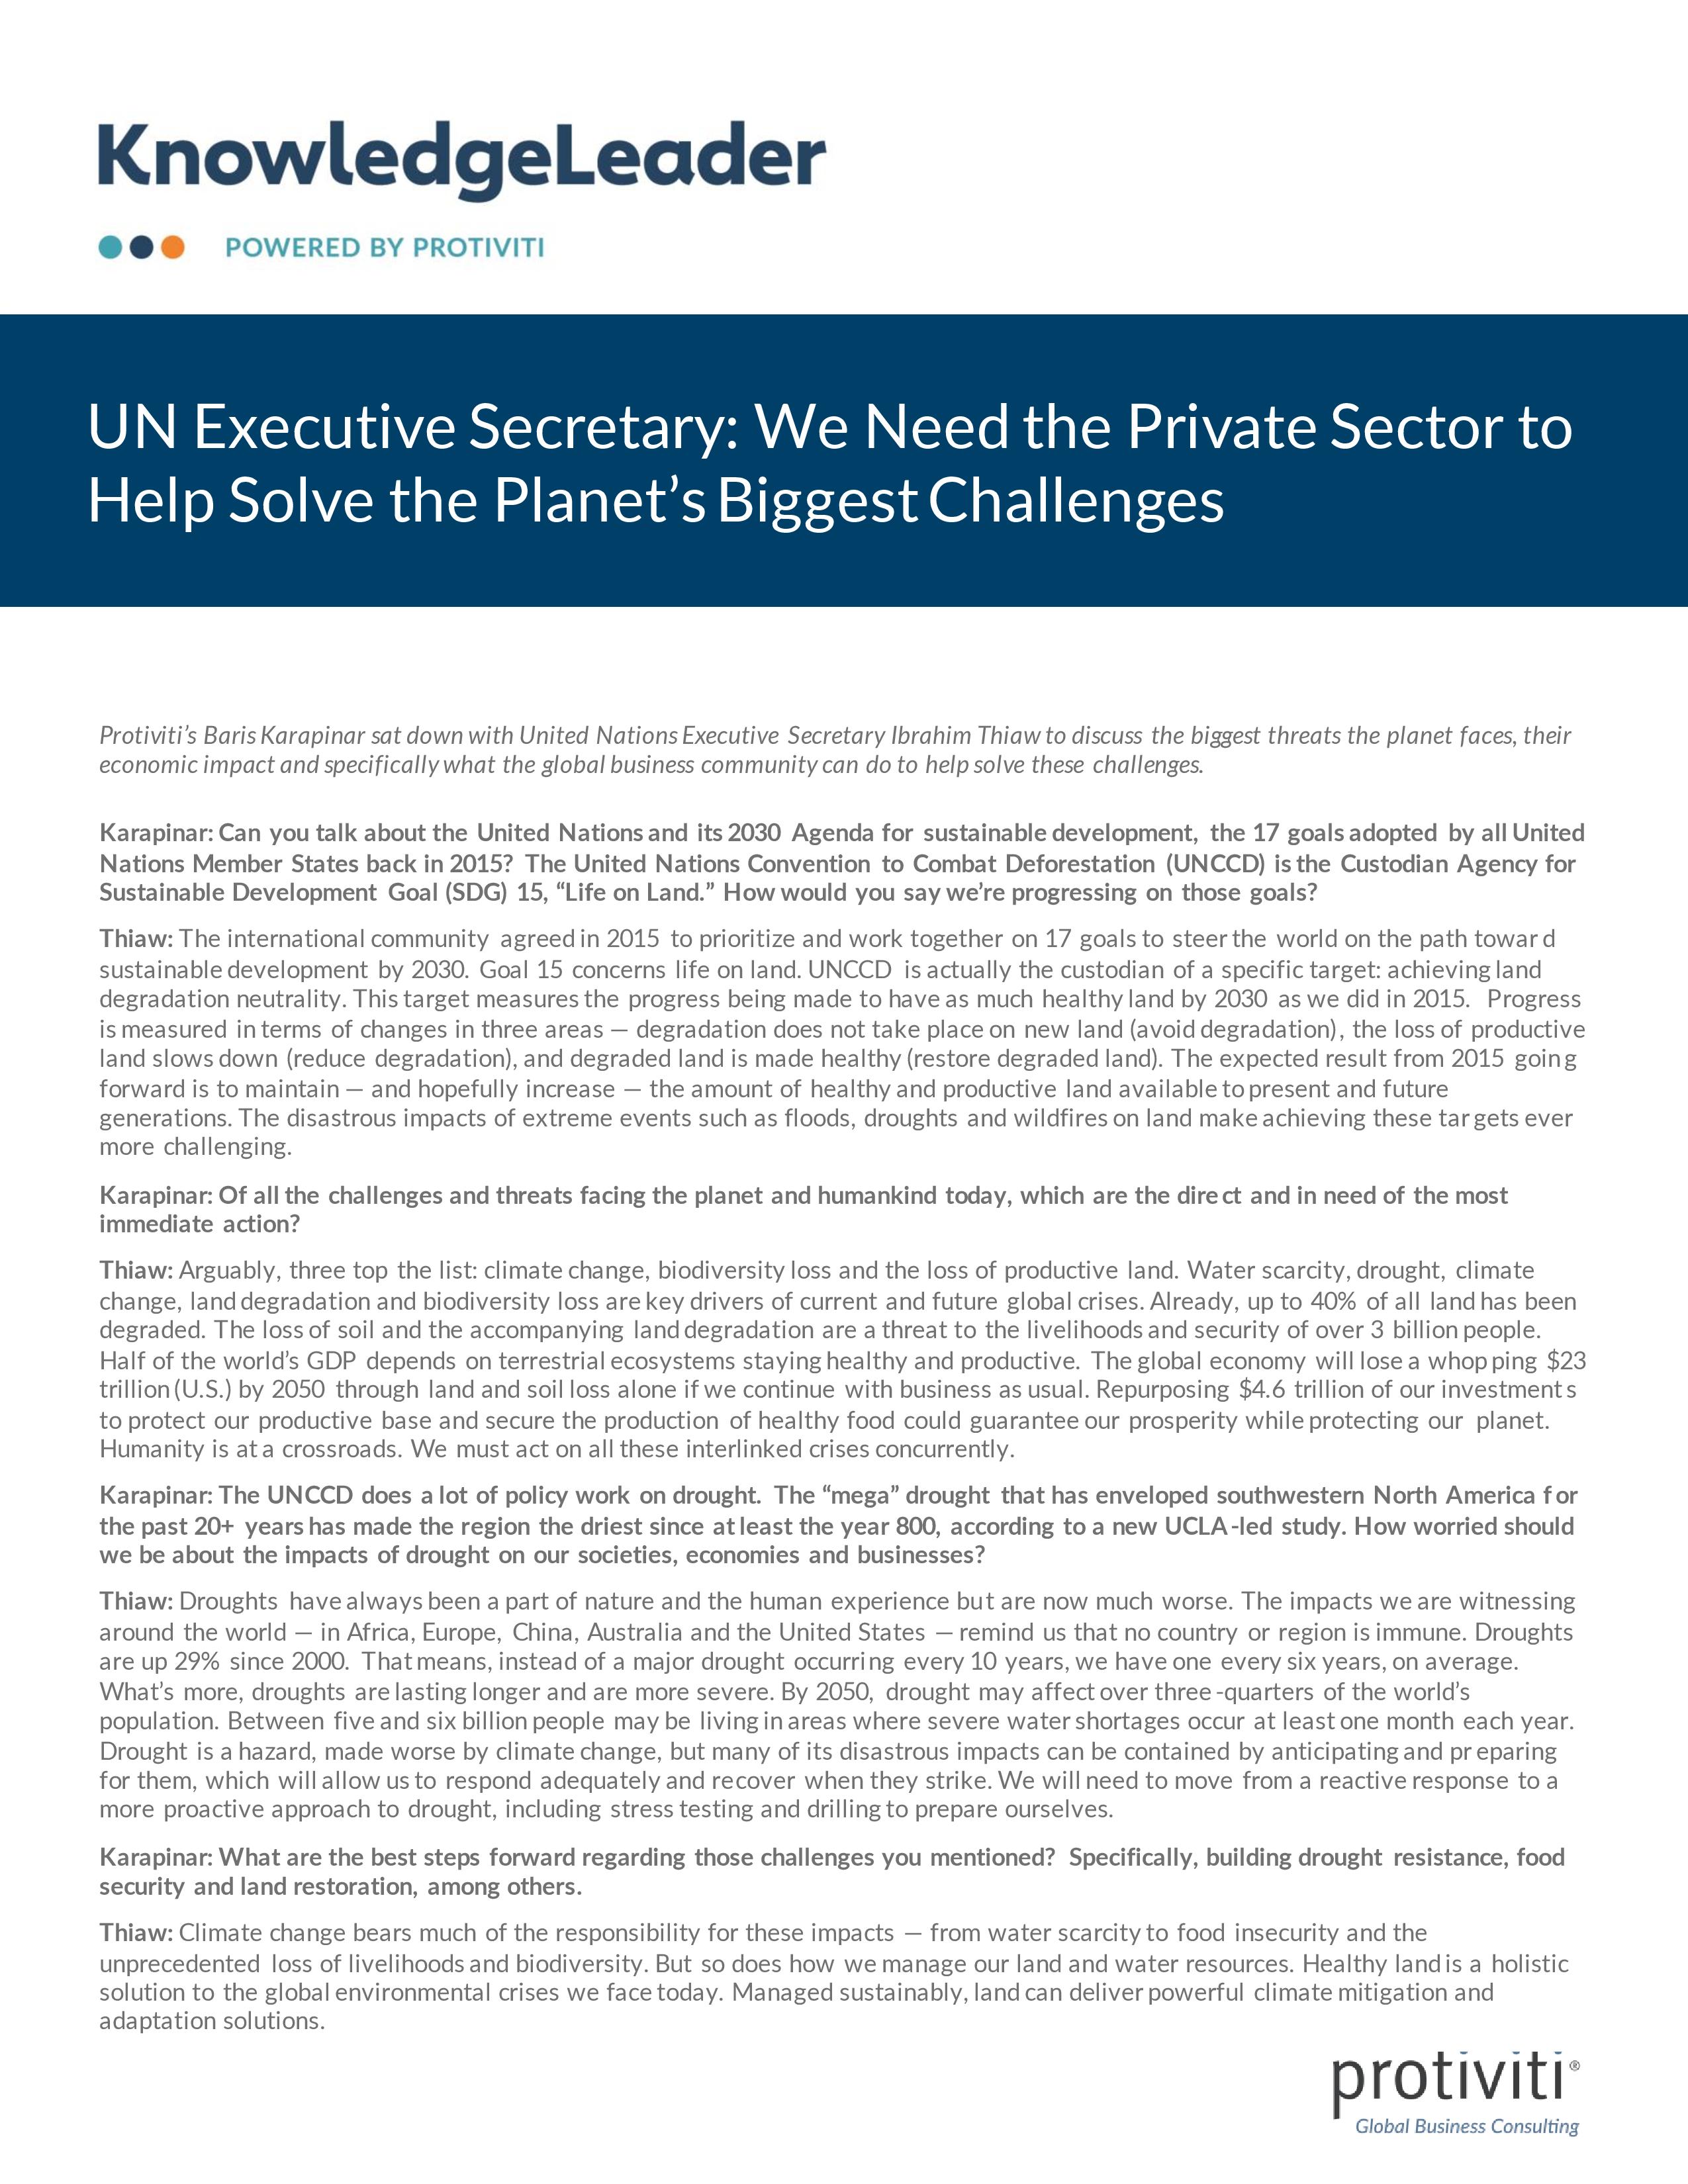 Screenshot of the first page of UN Executive Secretary We Need the Private Sector to Help Solve Planet’s Biggest Challenges